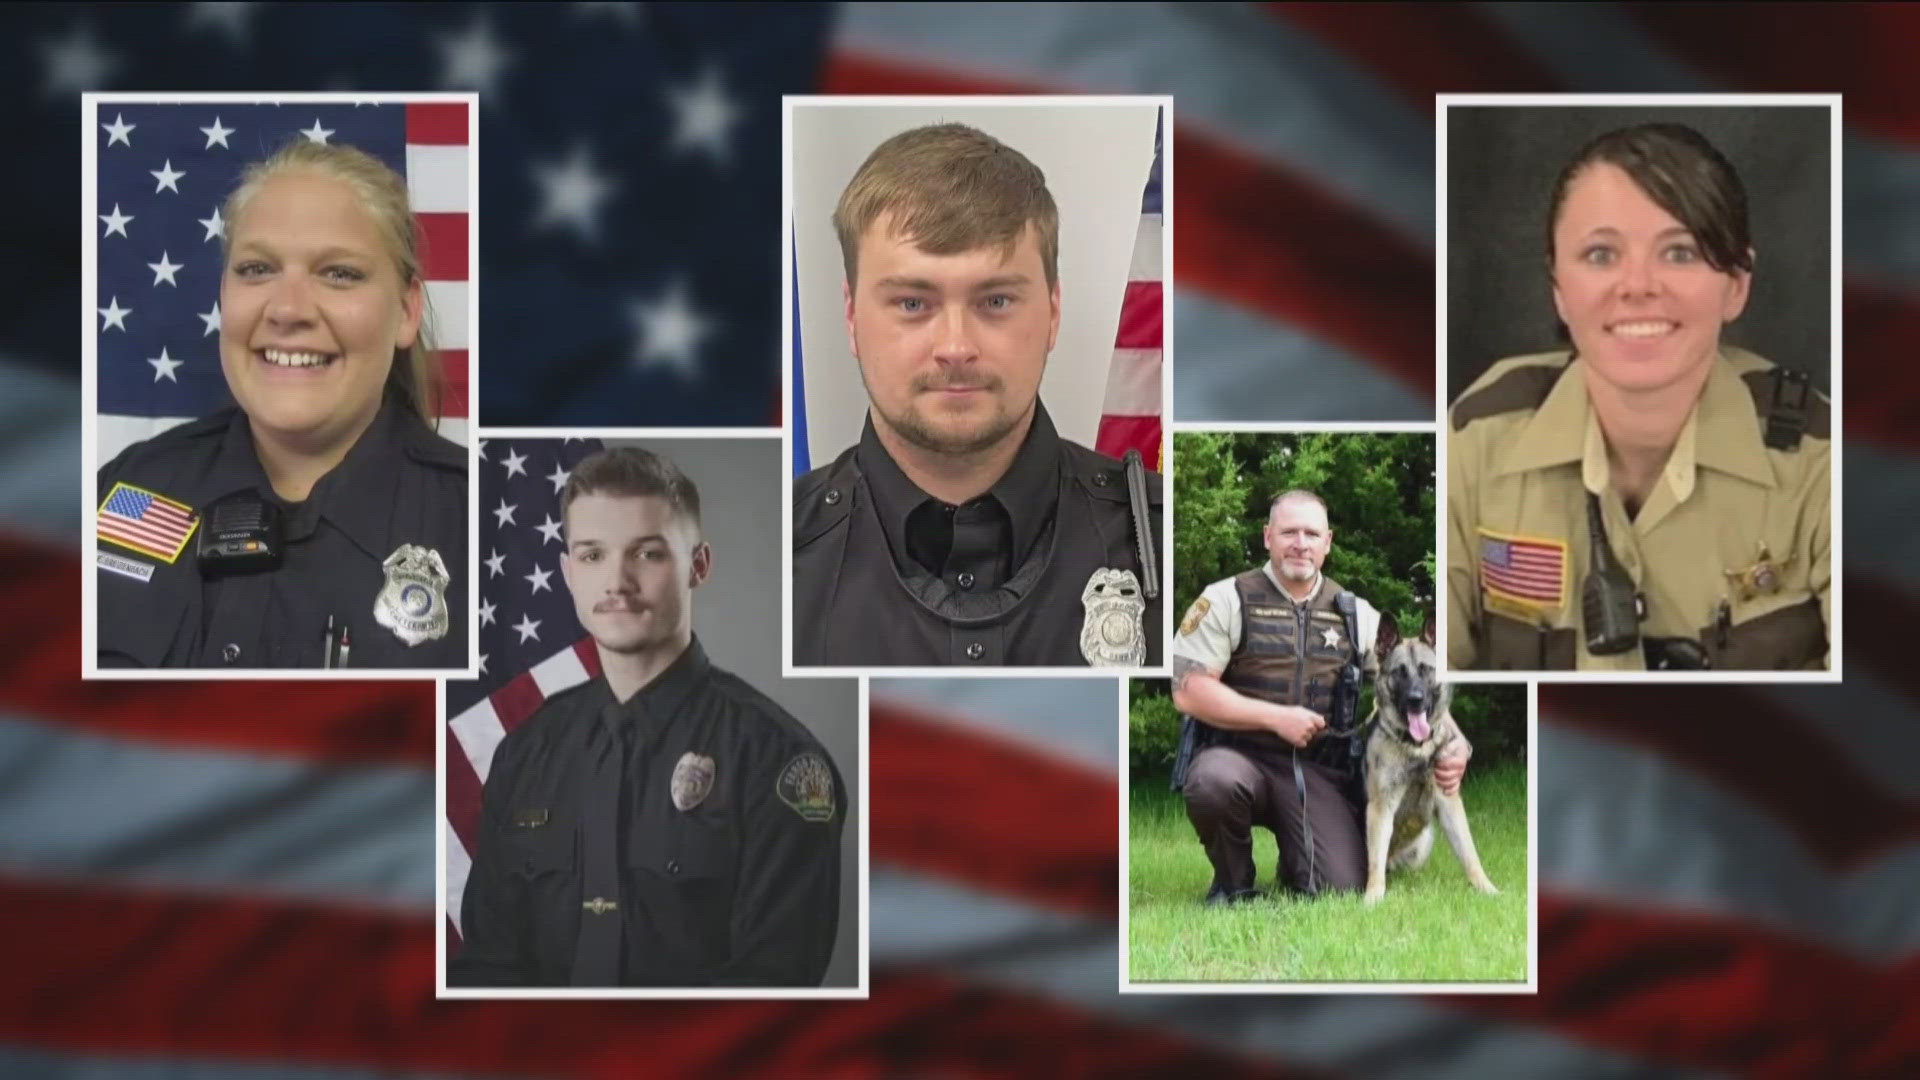 The U.S. Capitol will be honoring officers who died in the line of duty in 2023, including ten officers from Minnesota and the surrounding states.